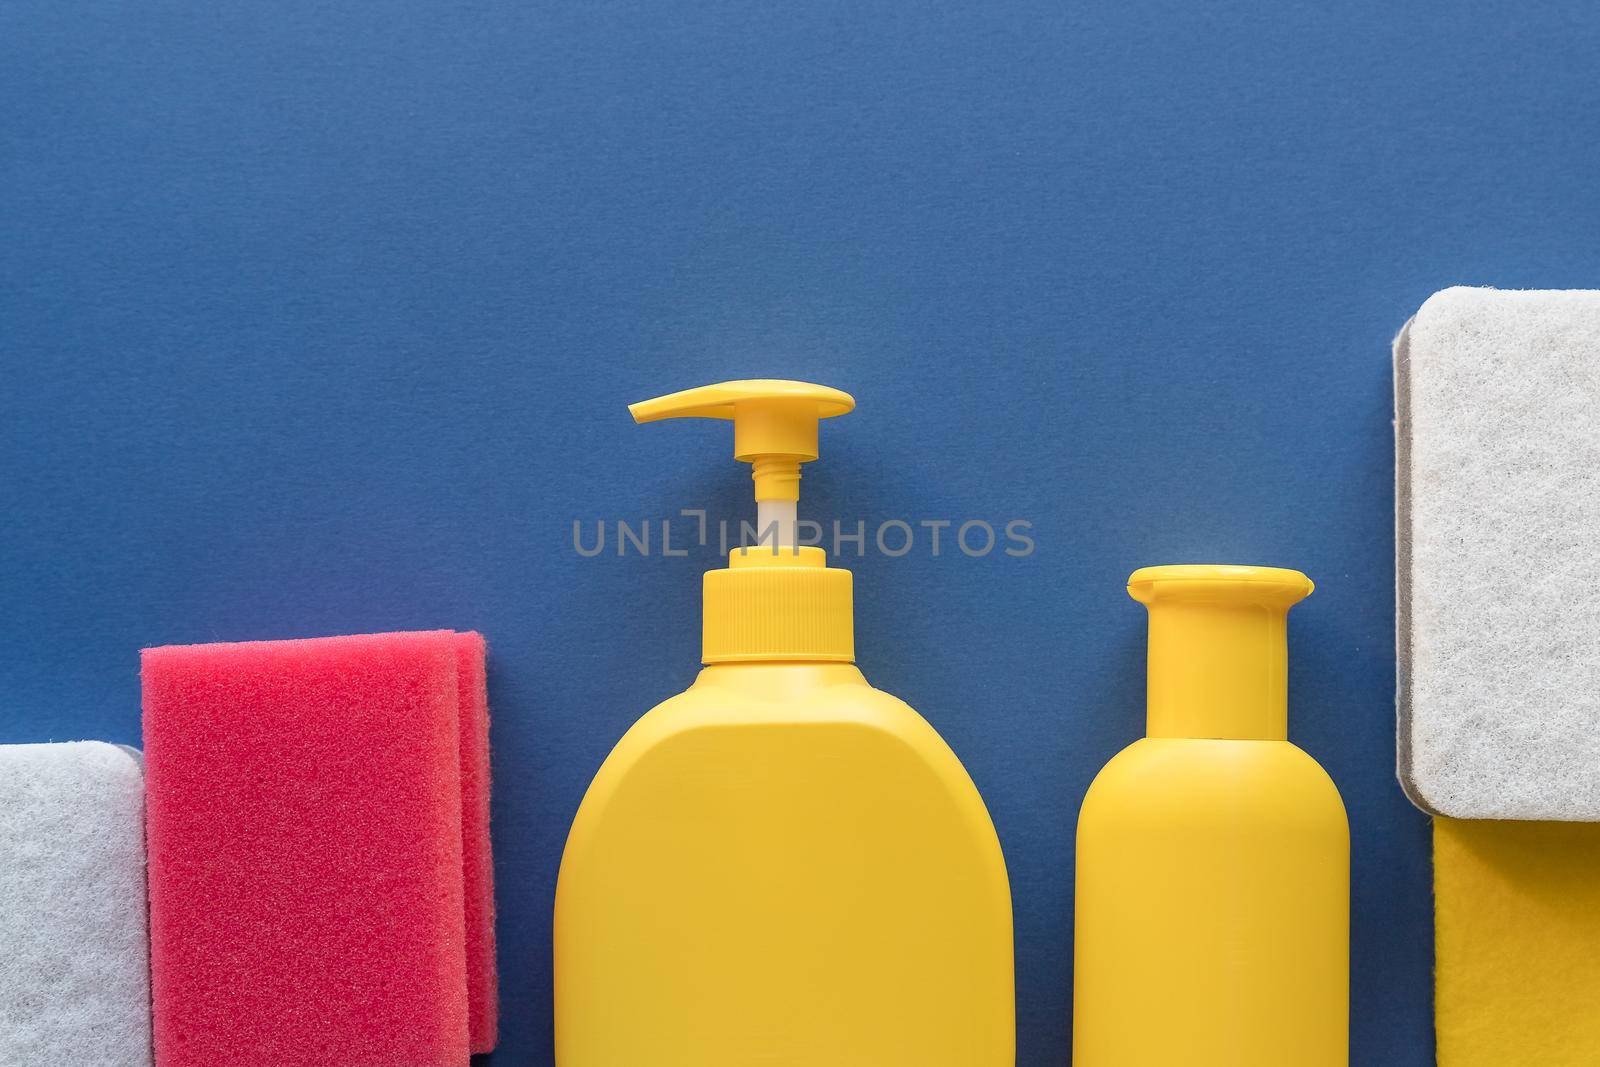 Colorful cleaning set for different surfaces in kitchen, bathroom and other rooms.